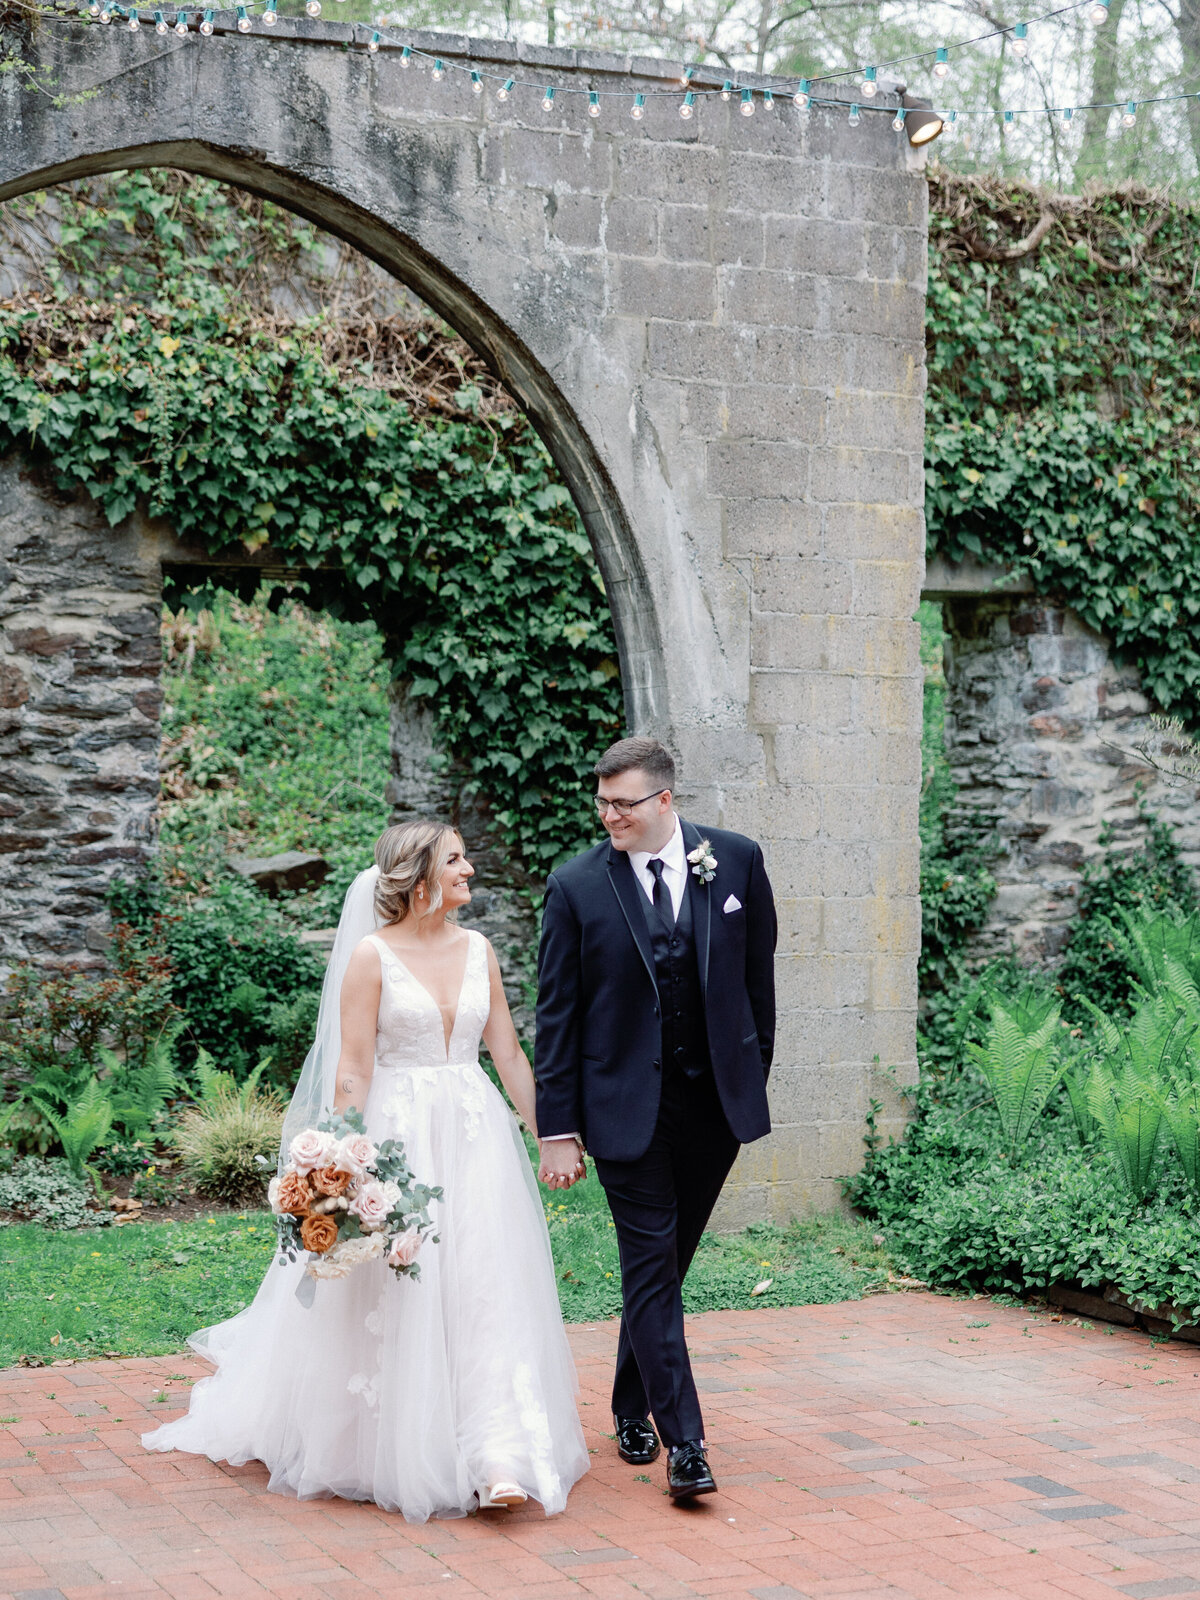 A bride and groom walks together as they gaze into each other's eyes under a stone archway